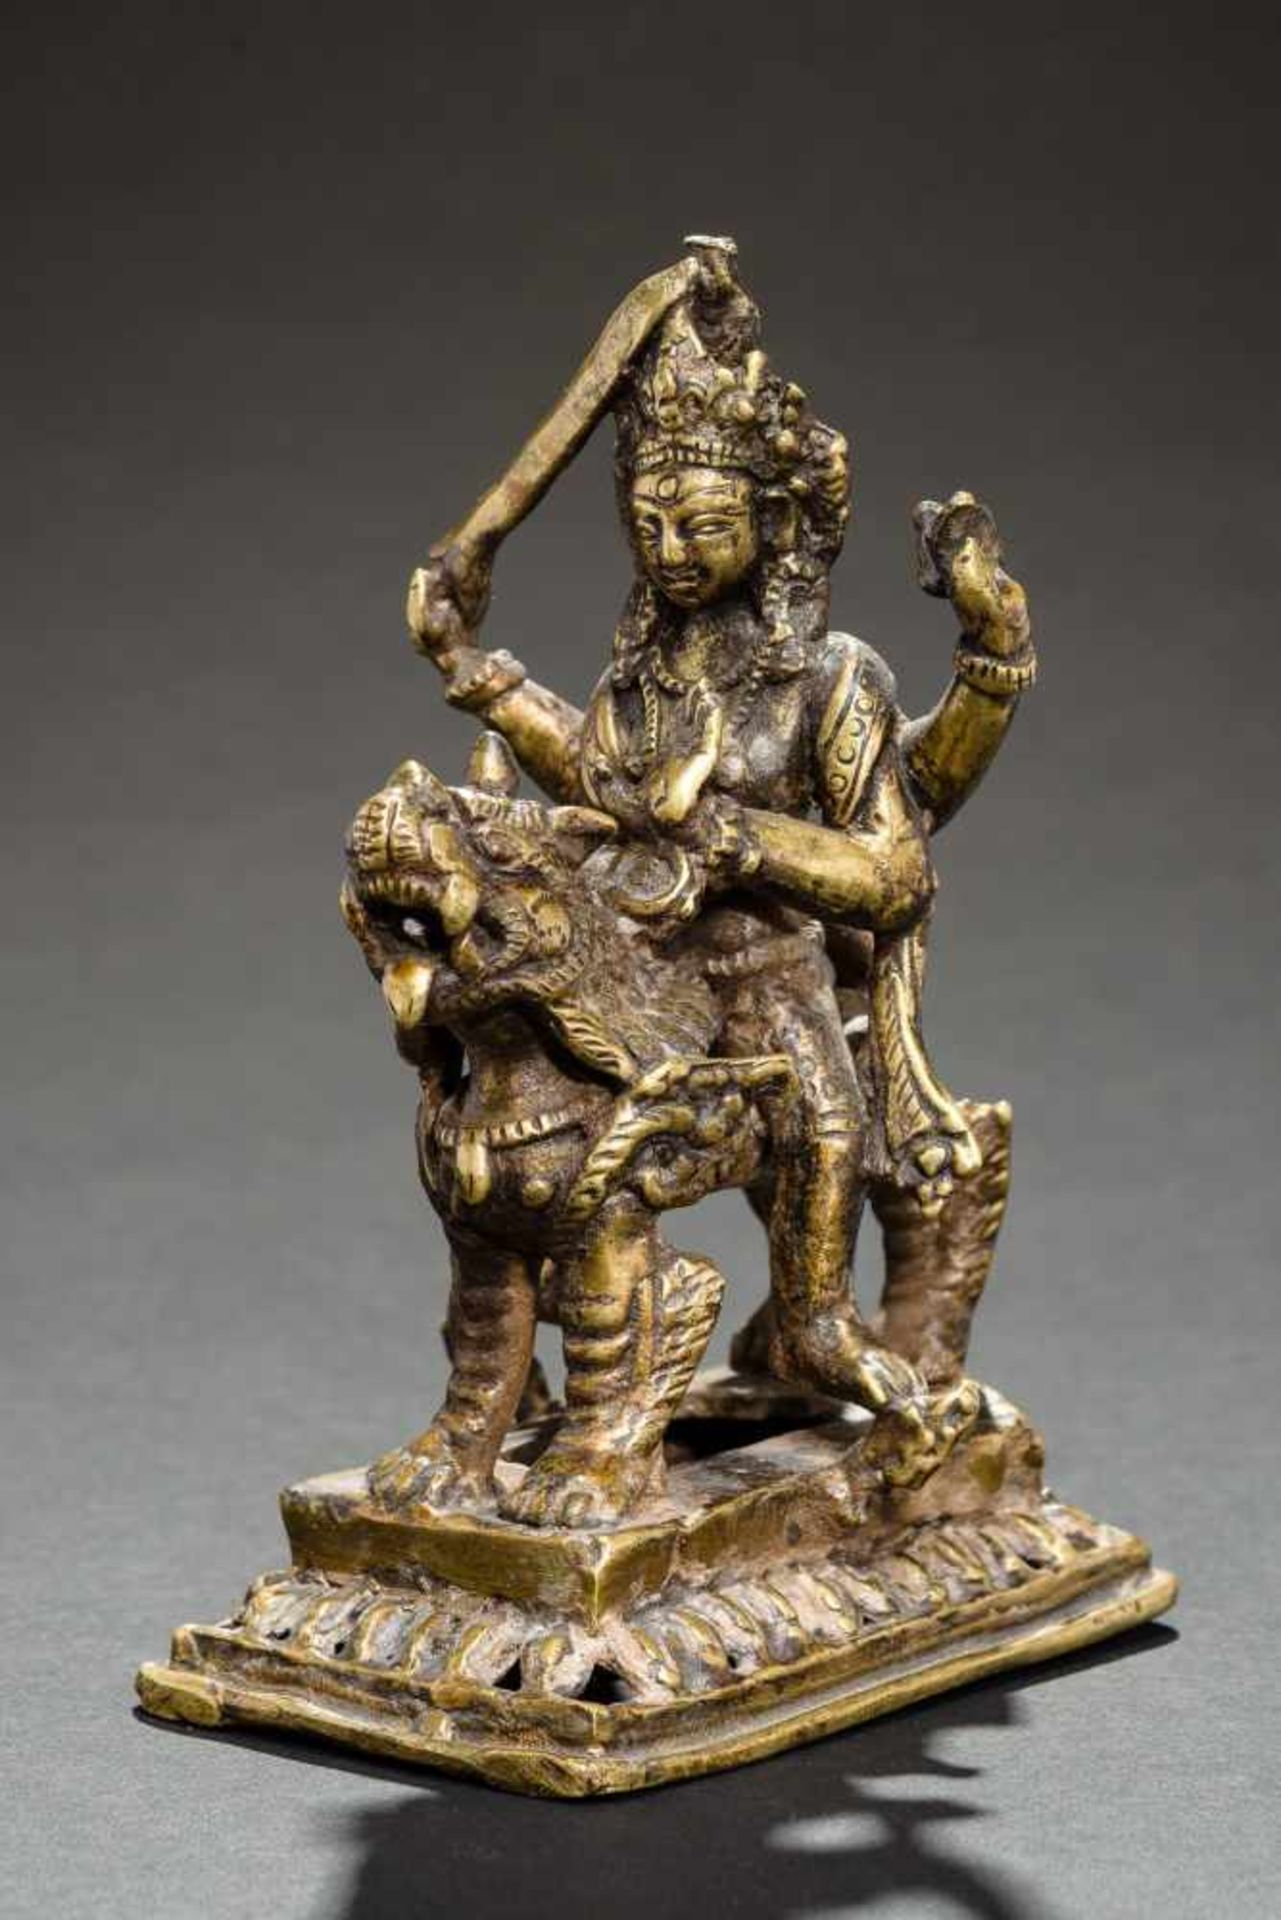 DEITIY (BODHISATTVA) AND SWORD ON LION Yellow bronze. Nepal, 19th to 20th cent. Fine statue of a